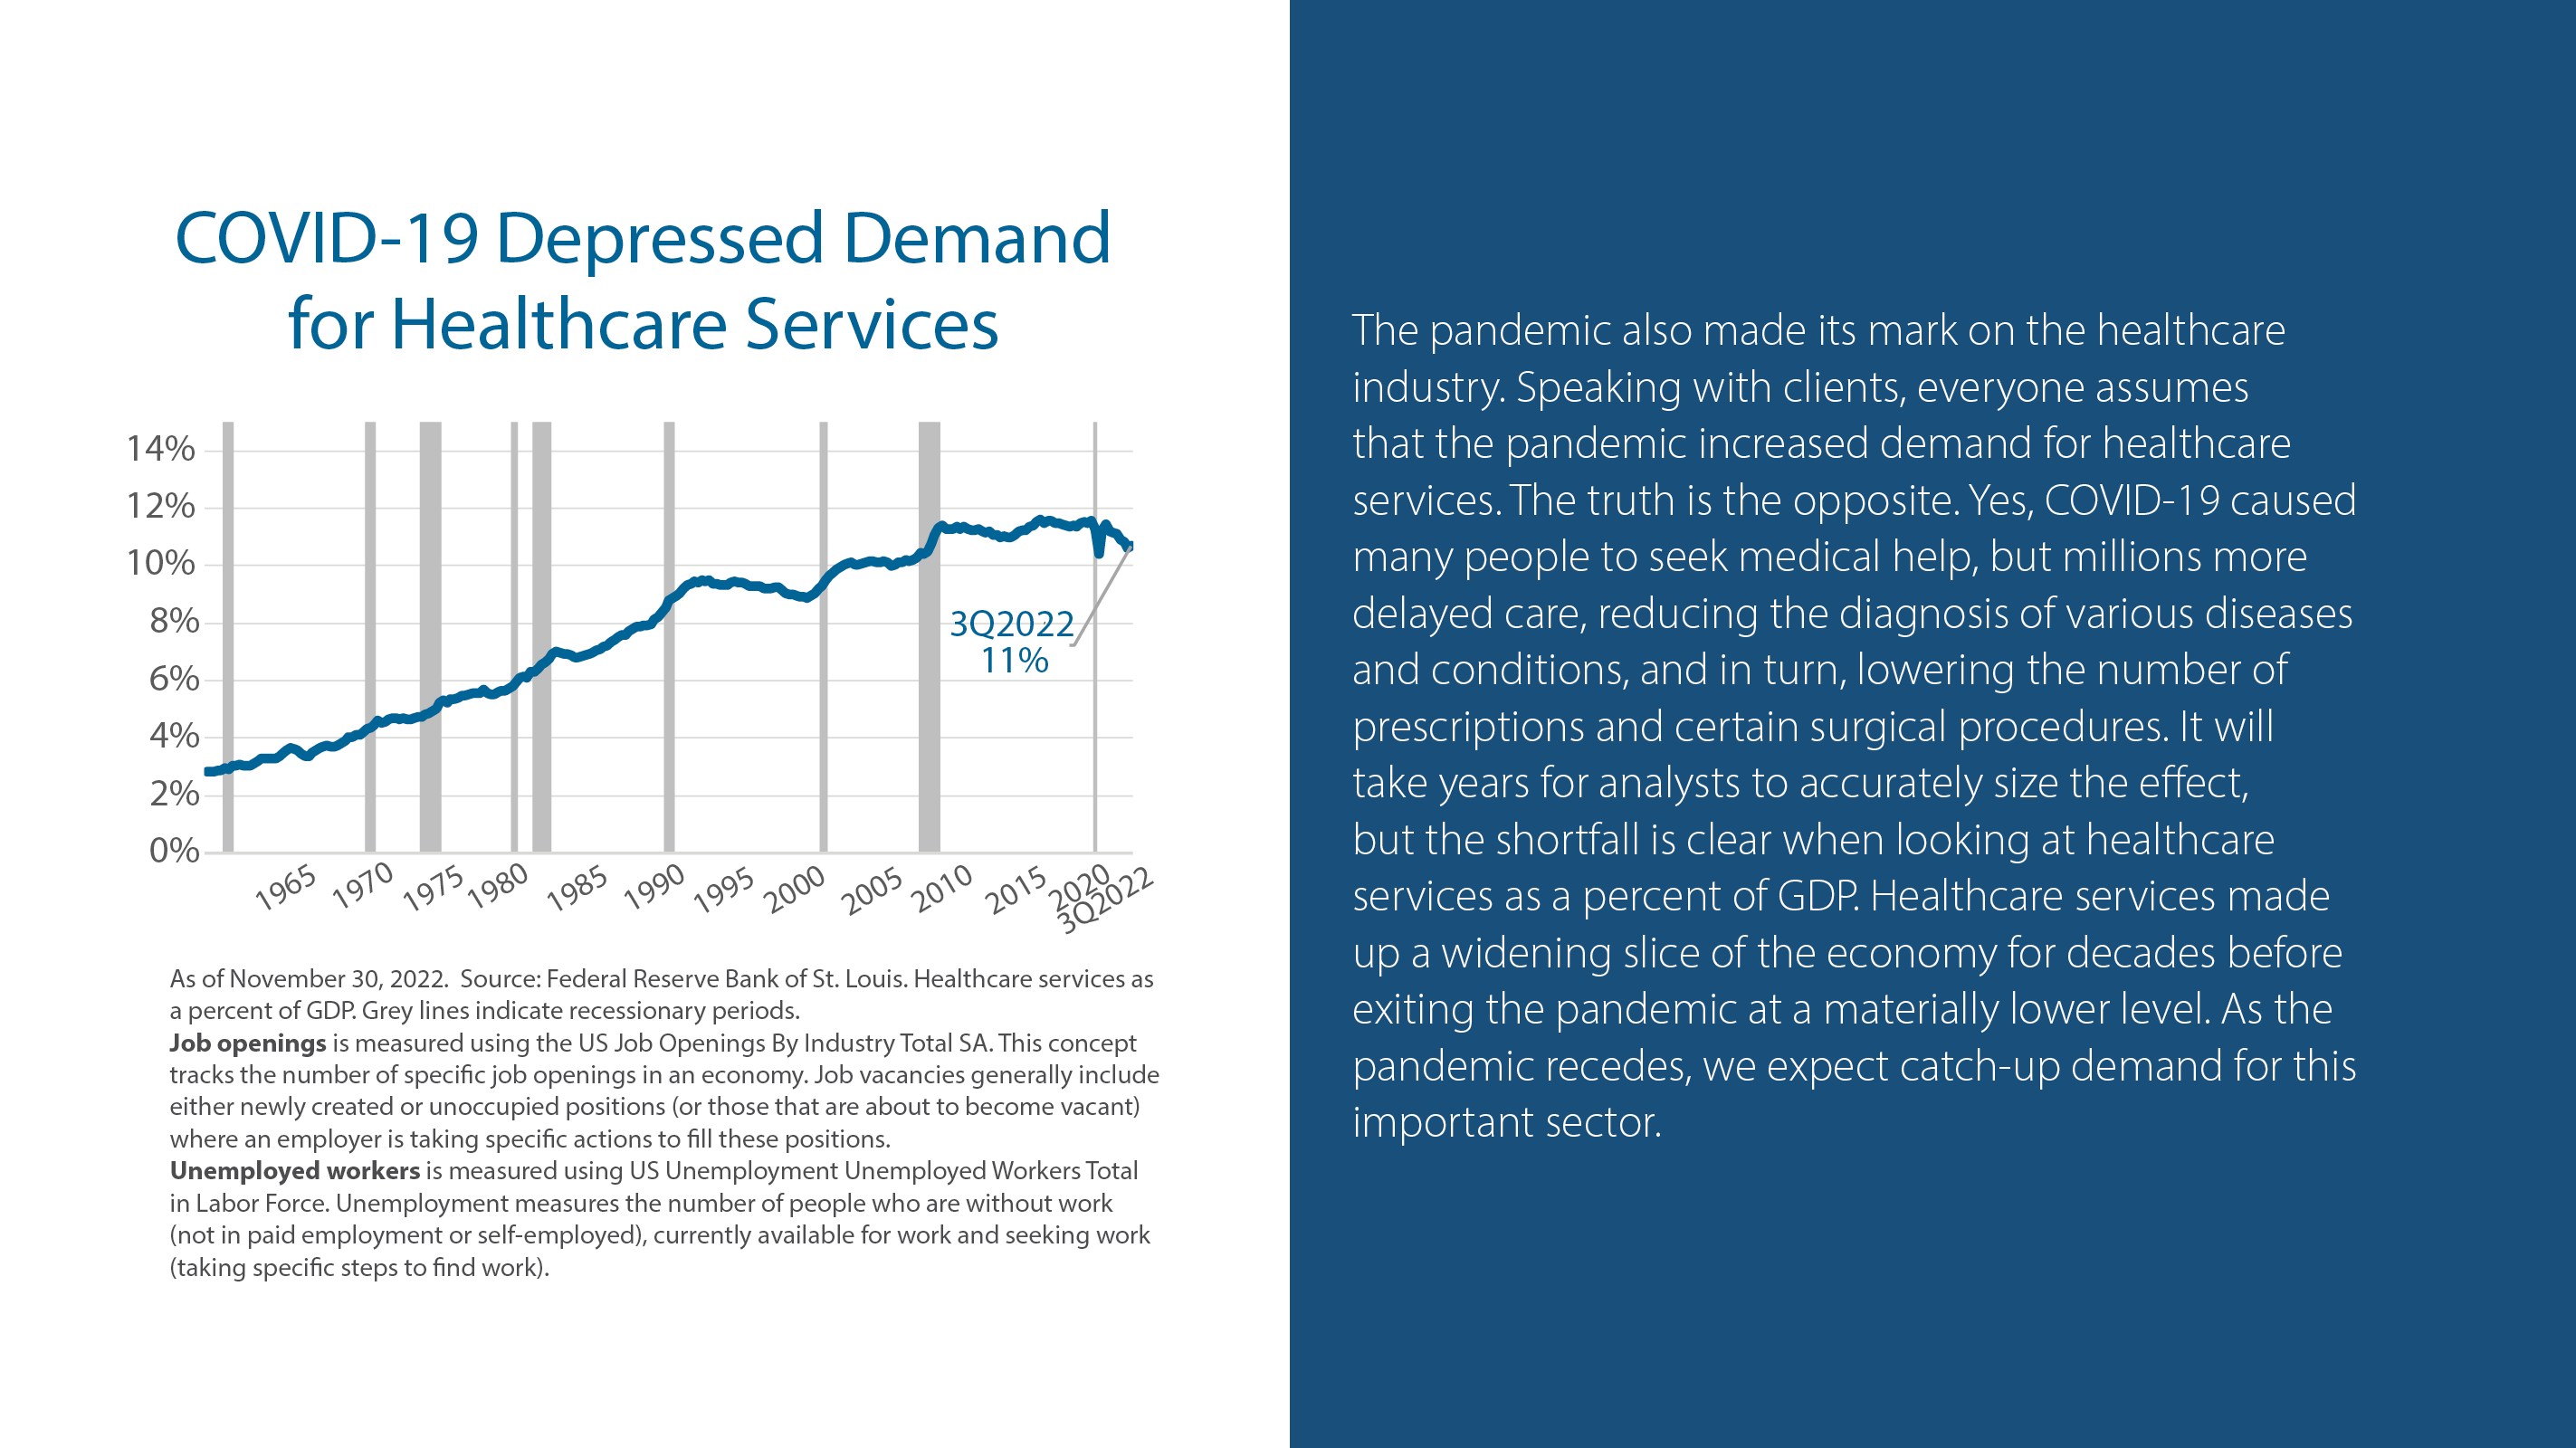 COVID-19 Depressed Demand for Healthcare Services